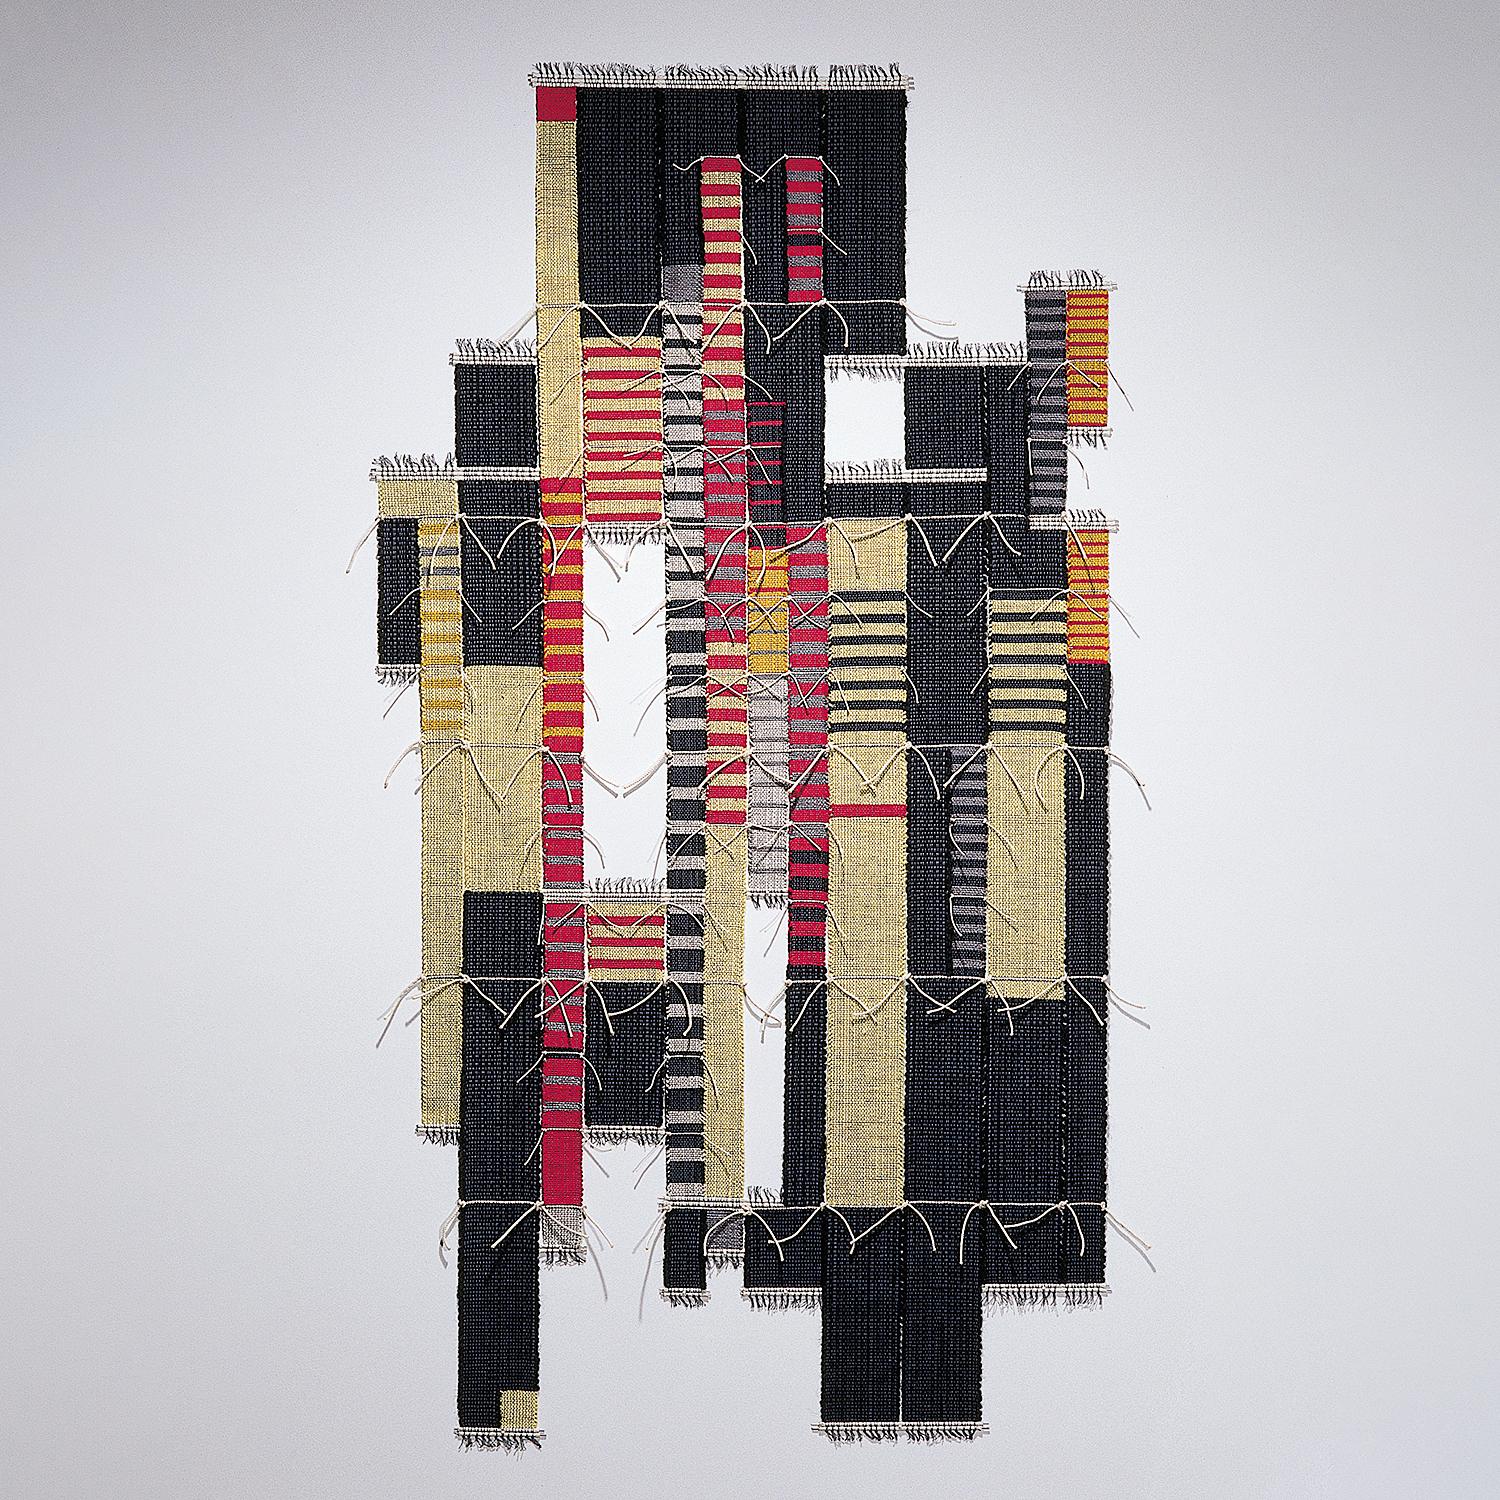 Blair Tate Abstract Sculpture - "Jaiselmer", Contemporary abstract woven tapestry, geometric textile sculpture